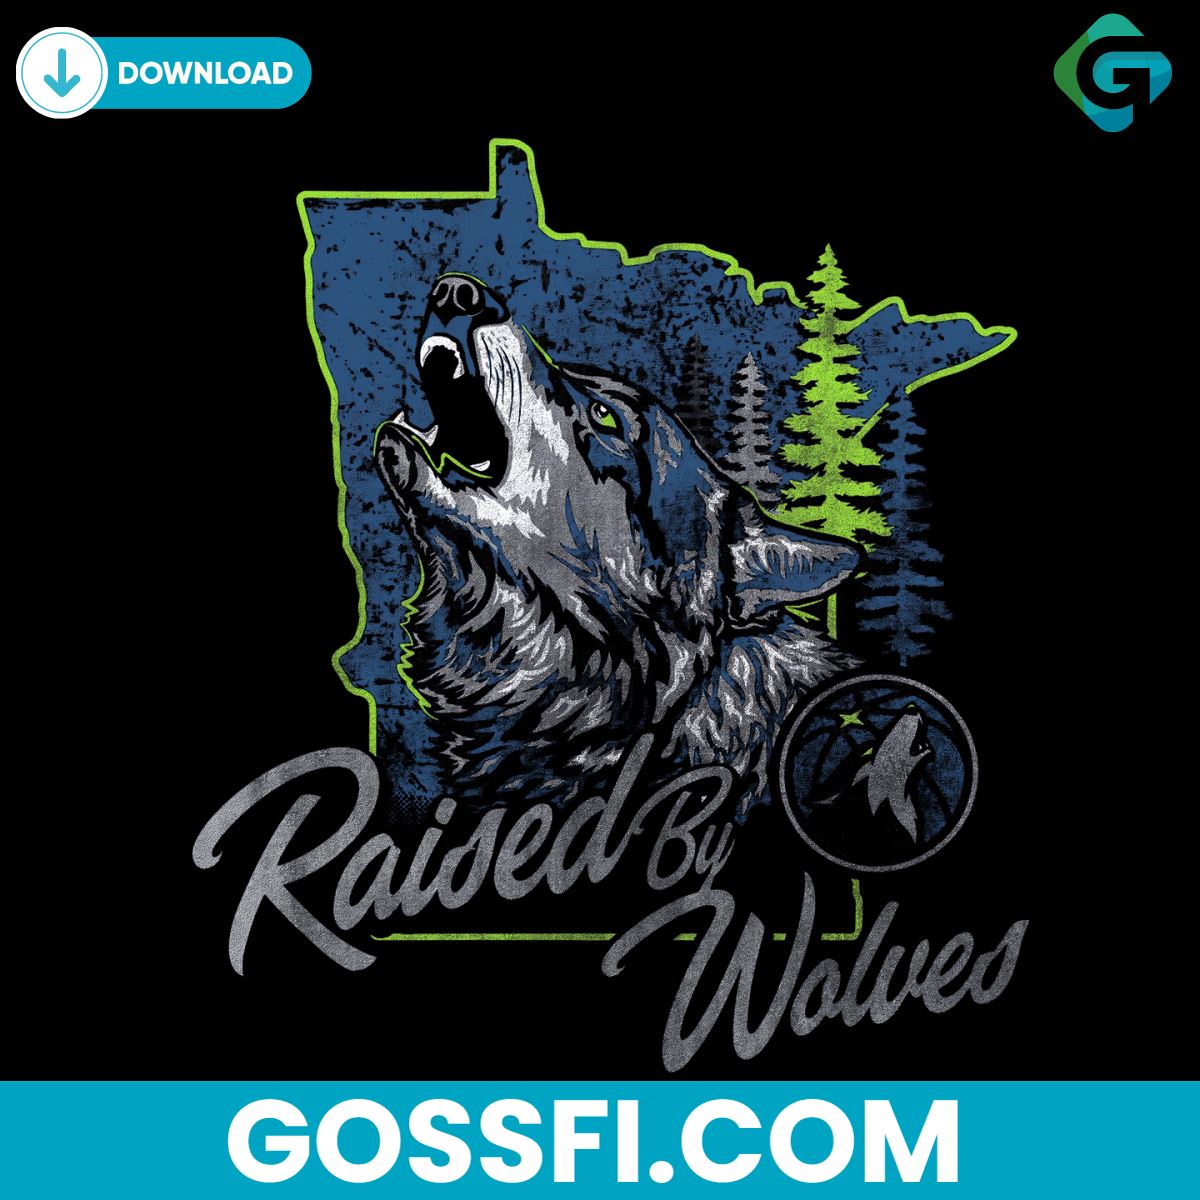 minnesota-timberwolves-raised-by-wolves-basketball-png